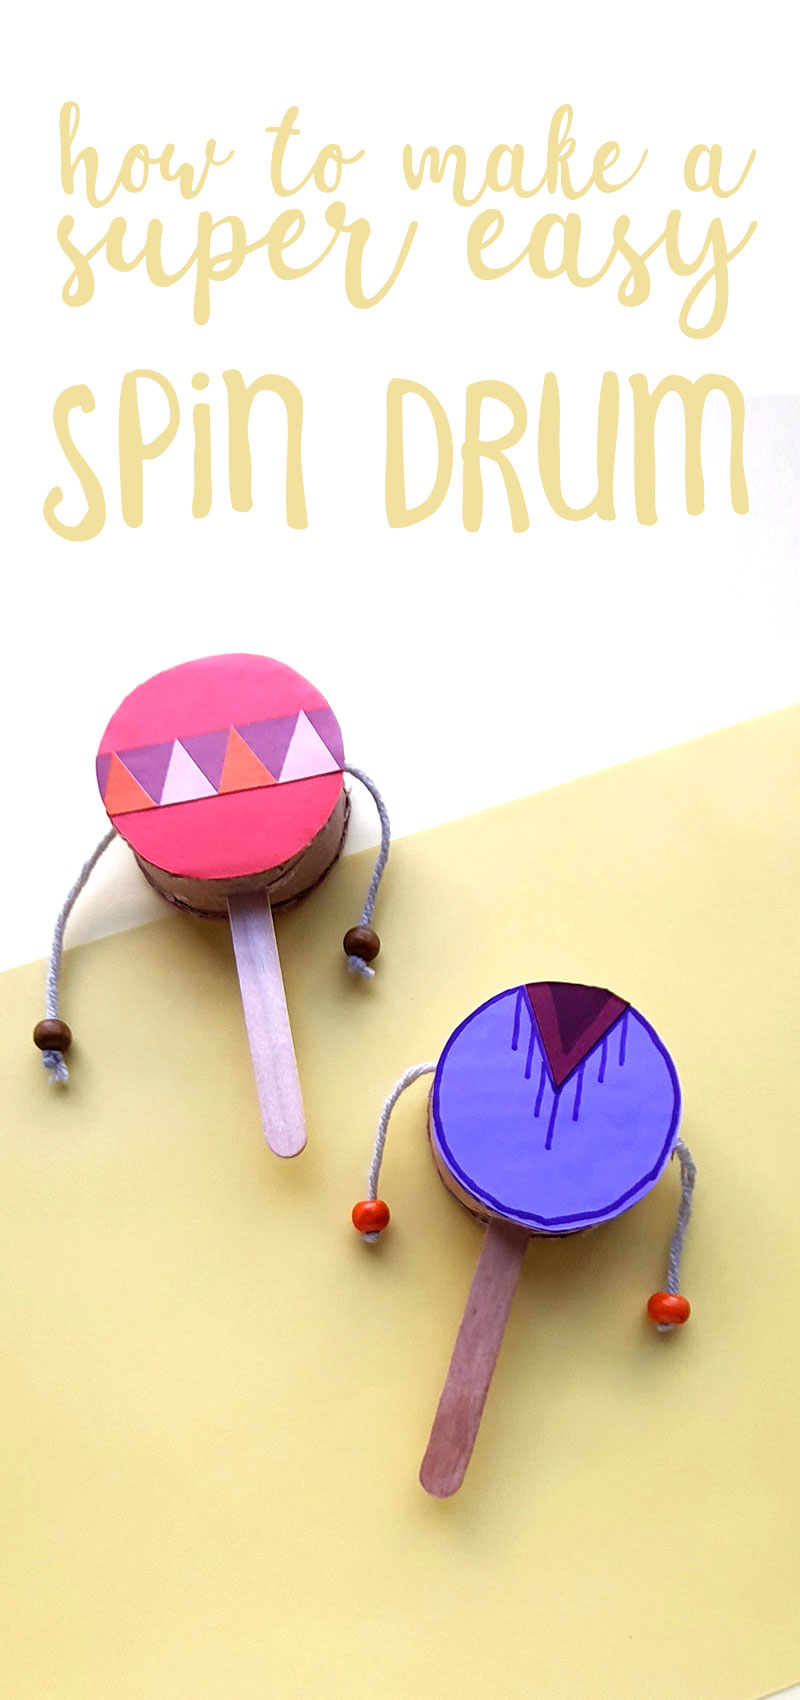 Learn how to make an easy spin drum craft with this cool tutorial using recycled materials! This DIY noisemaker is the perfect Purim Grogger craft for kids too!